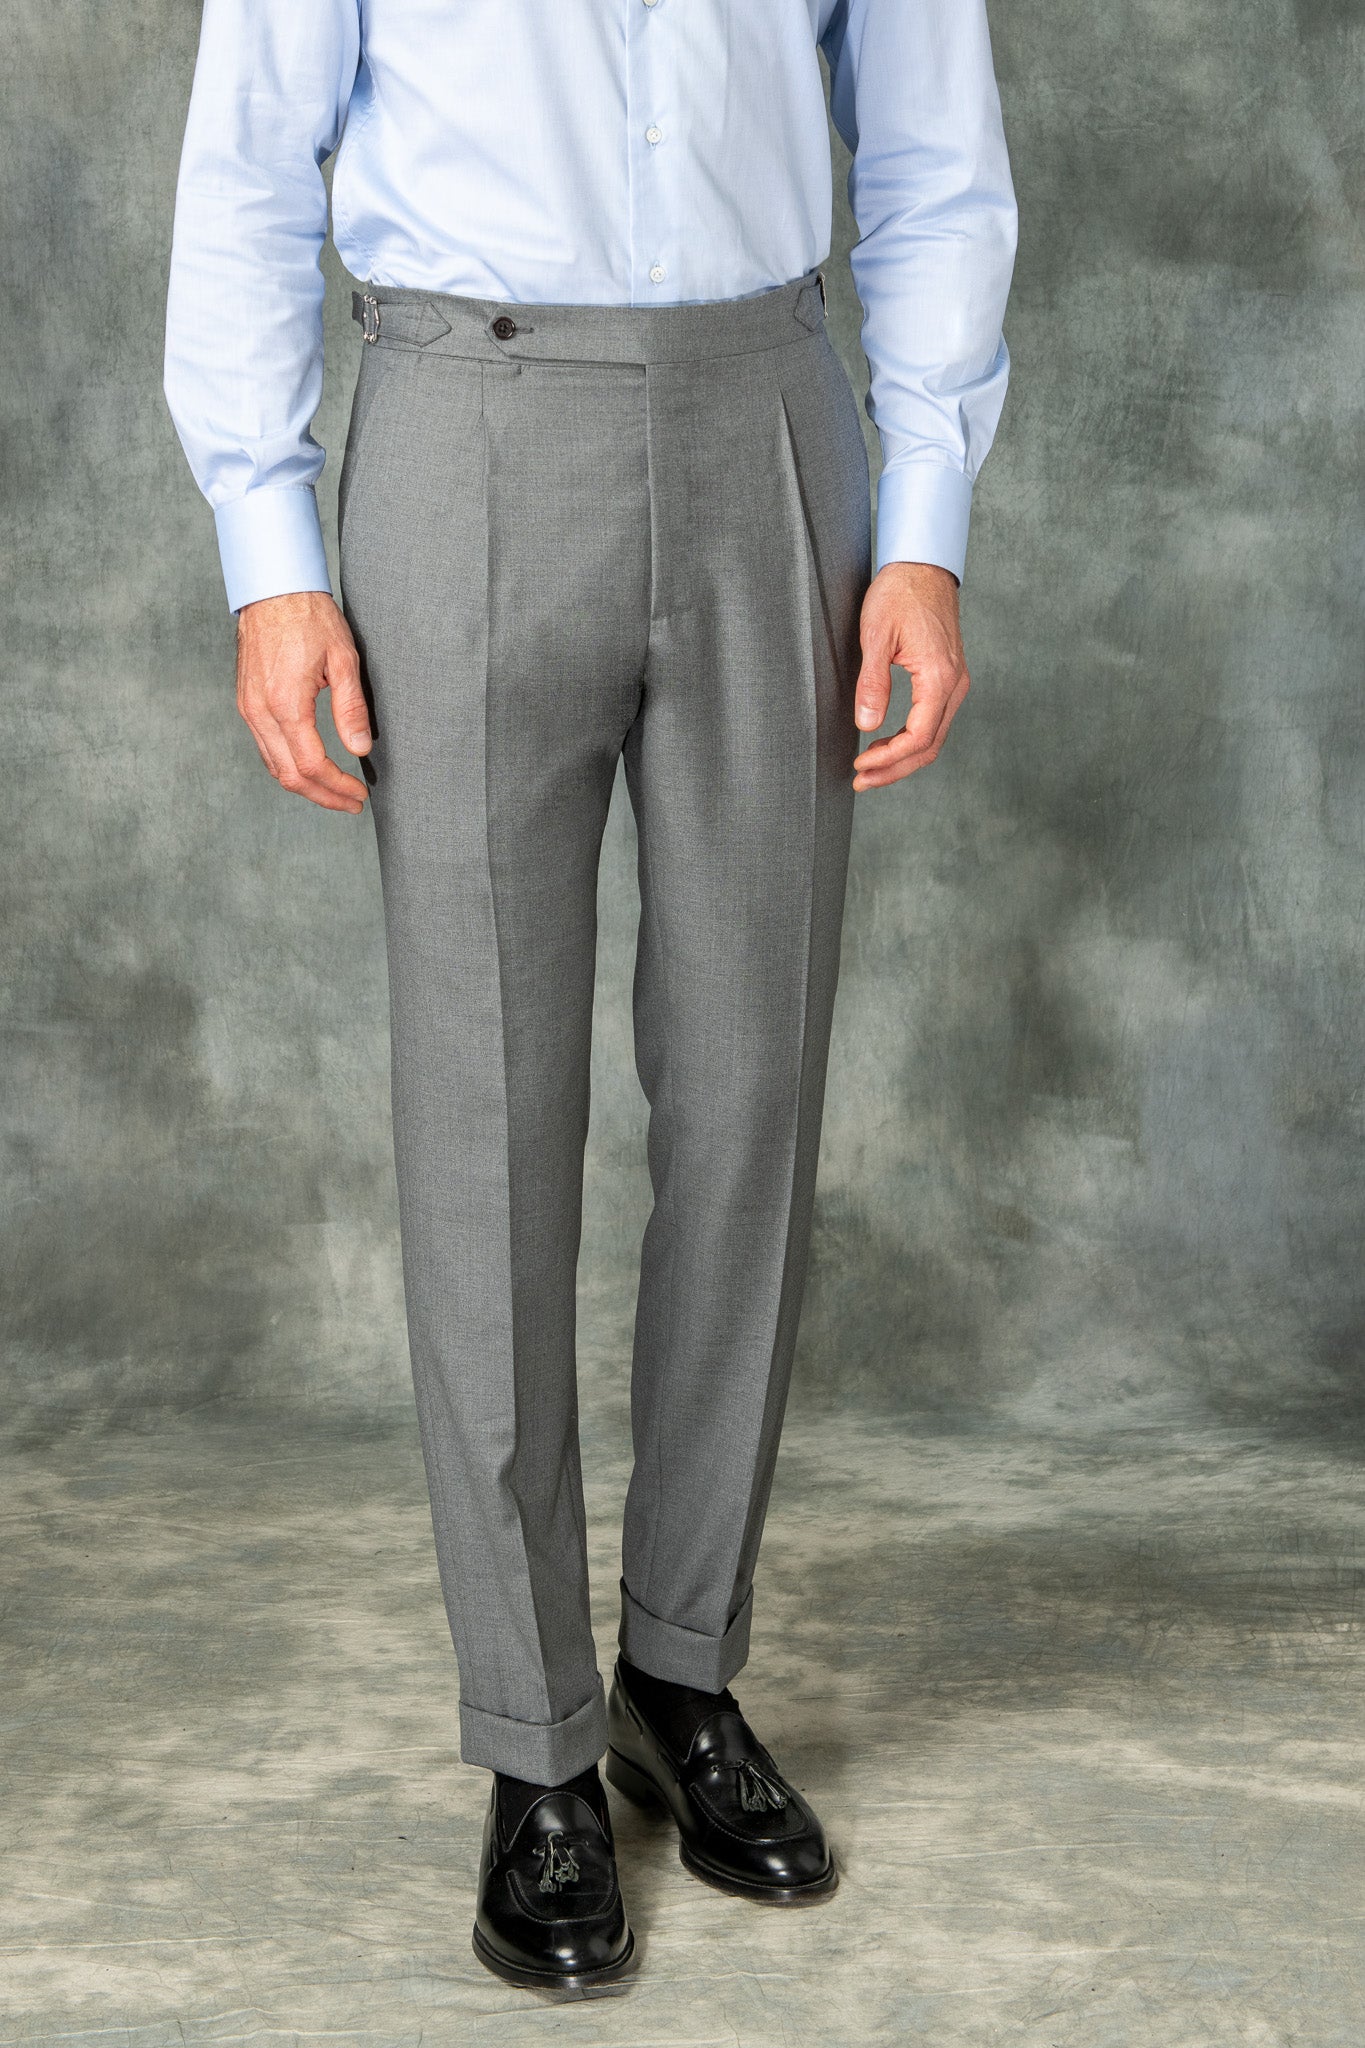 Grey Biella trousers "Sartoriale Collection" - Made in Italy